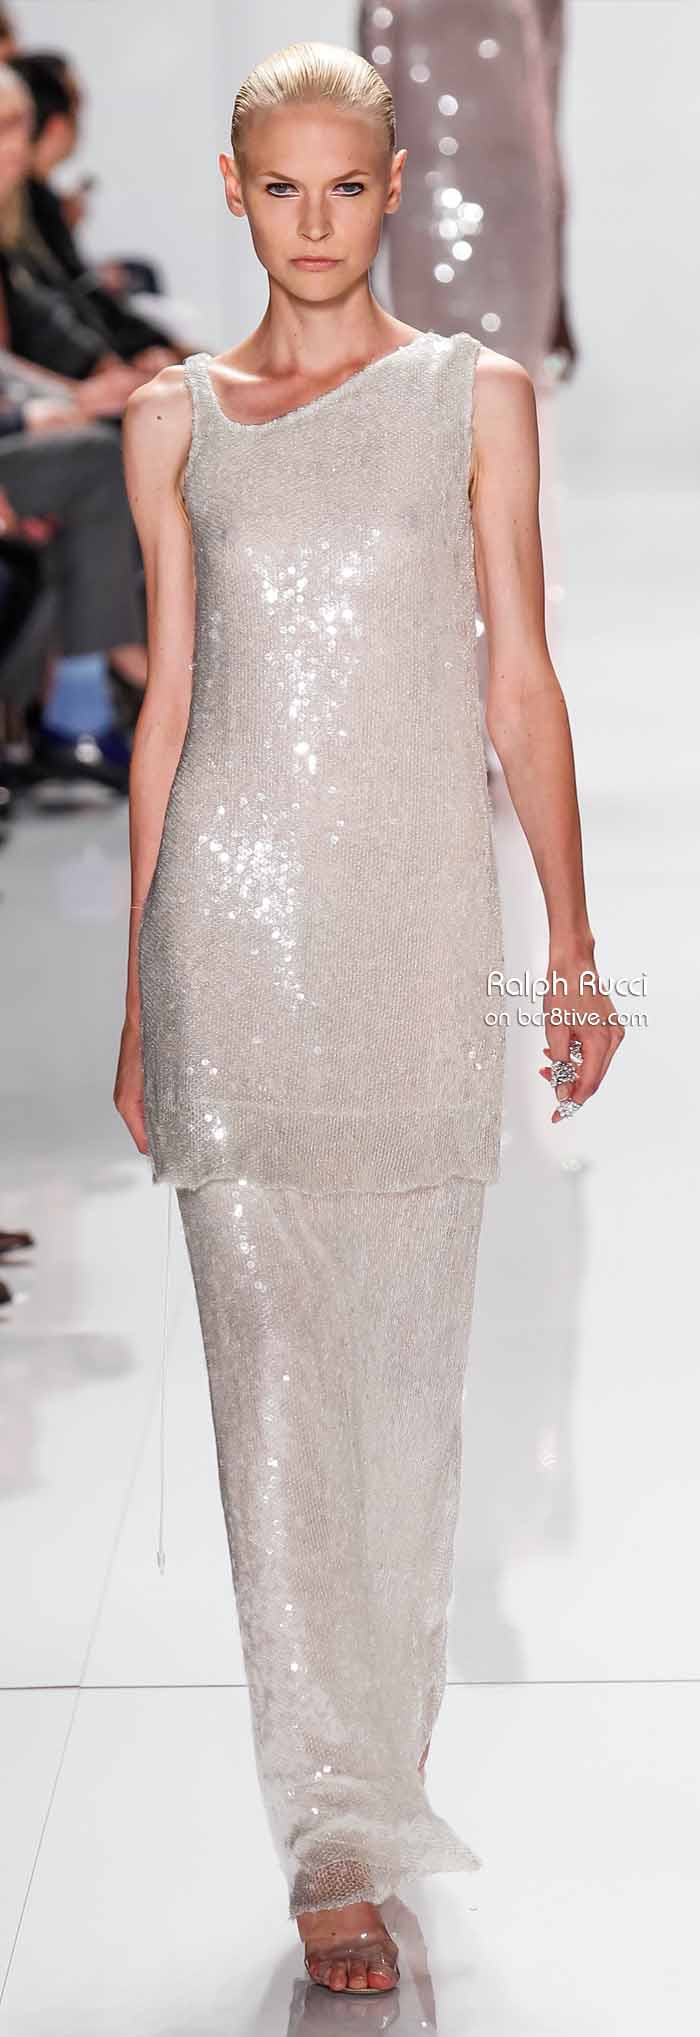 Ralph Rucci Spring 2014 #NYFW - Gown with Sequins